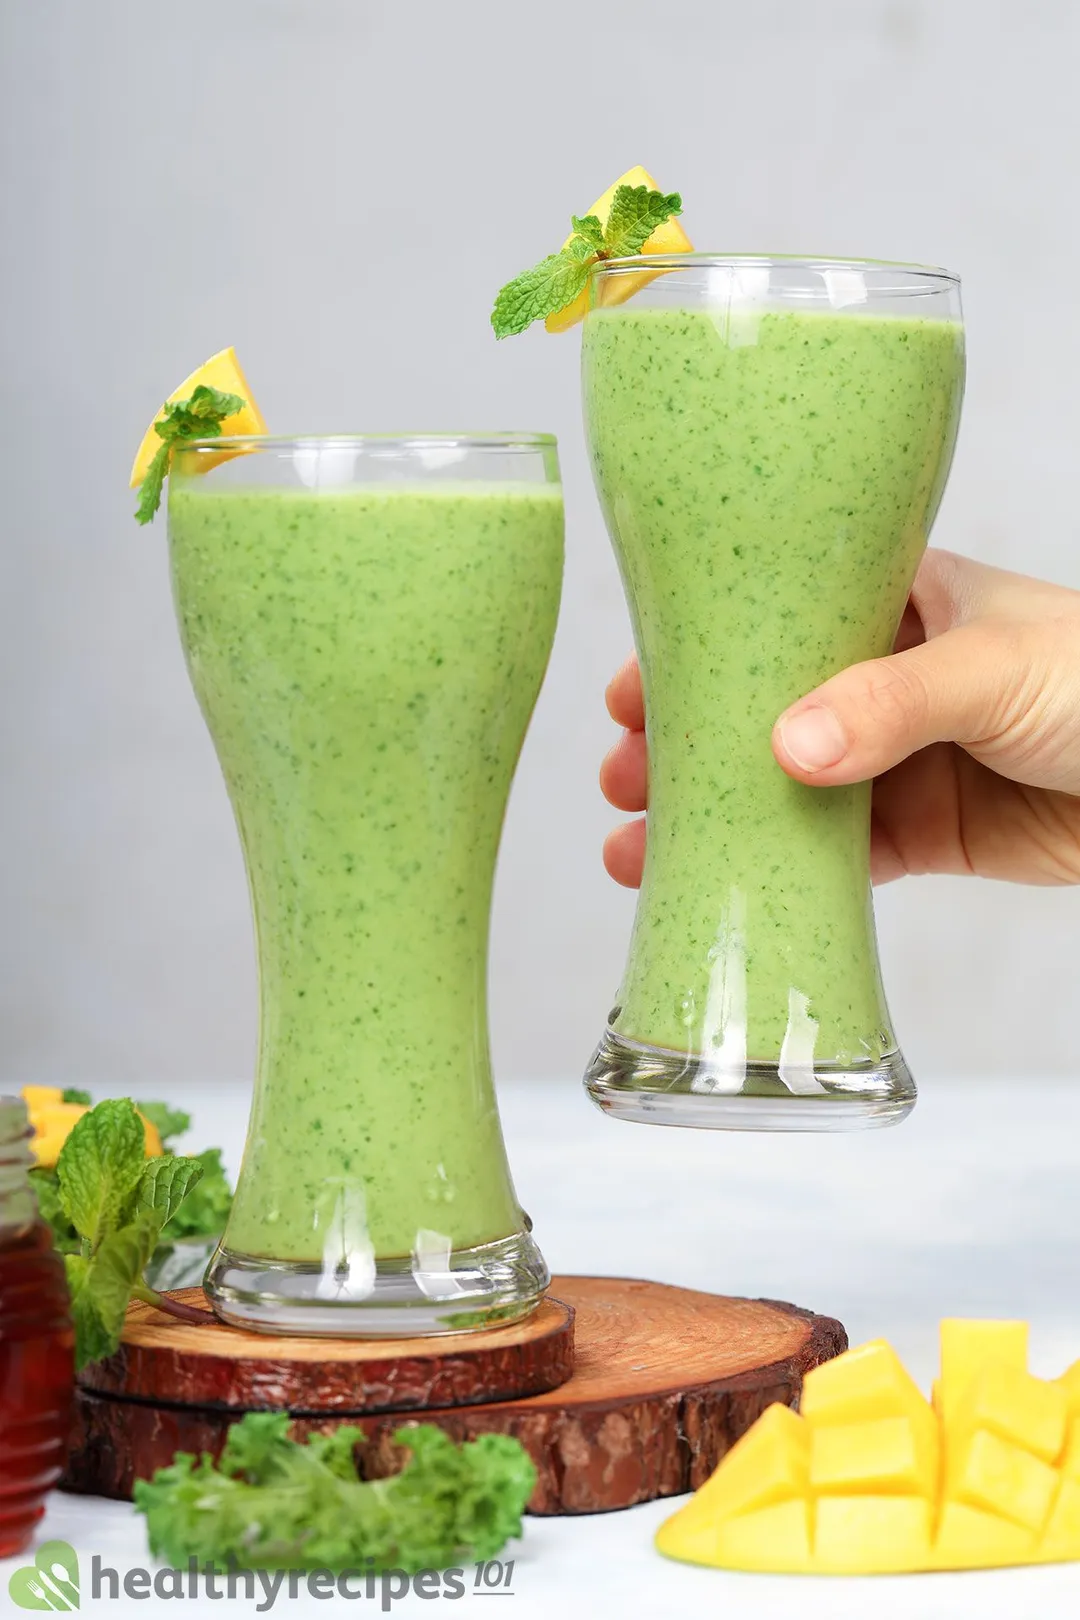 two glasses of mango kale smoothie, 1 on a tray and a hand holds the other